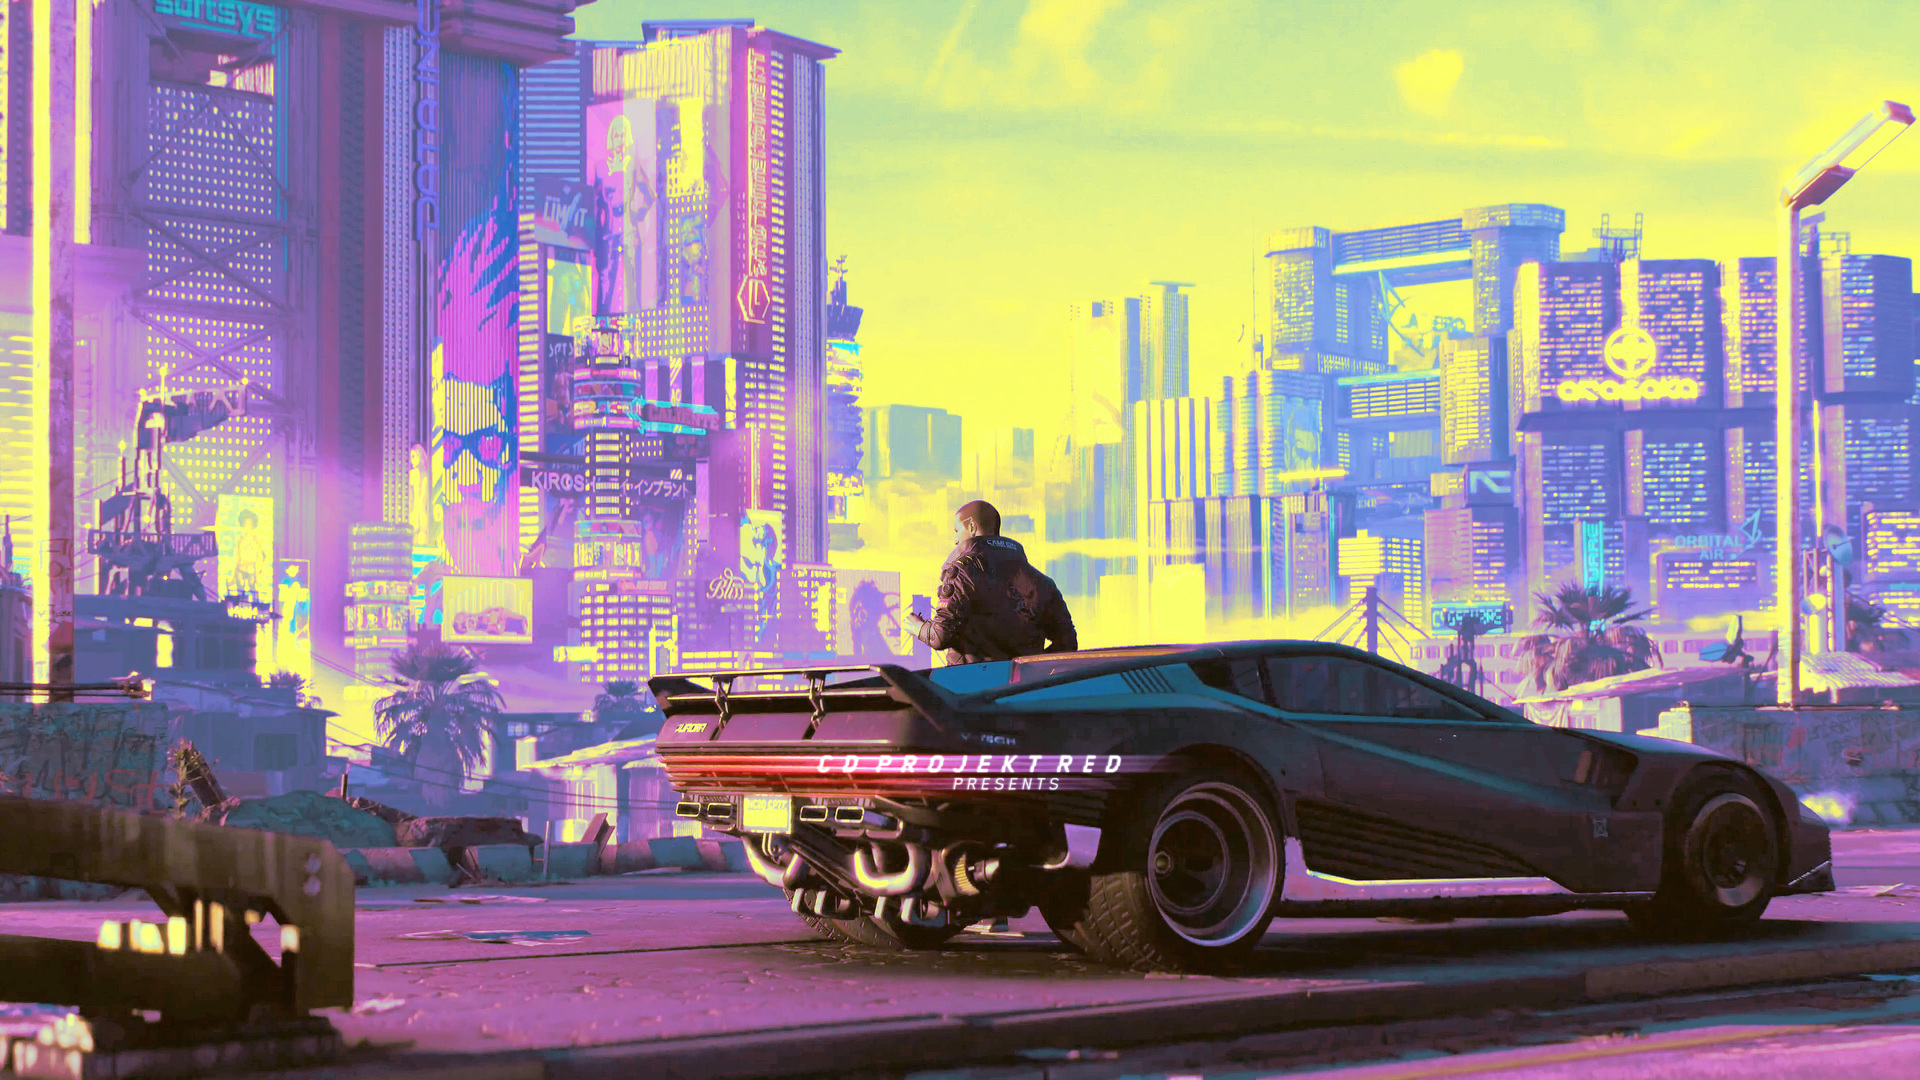 1920x1080 Cyberpunk 2077 Artistic 4k Laptop Full Hd 1080p Hd 4k Wallpapers Images Backgrounds Photos And Pictures